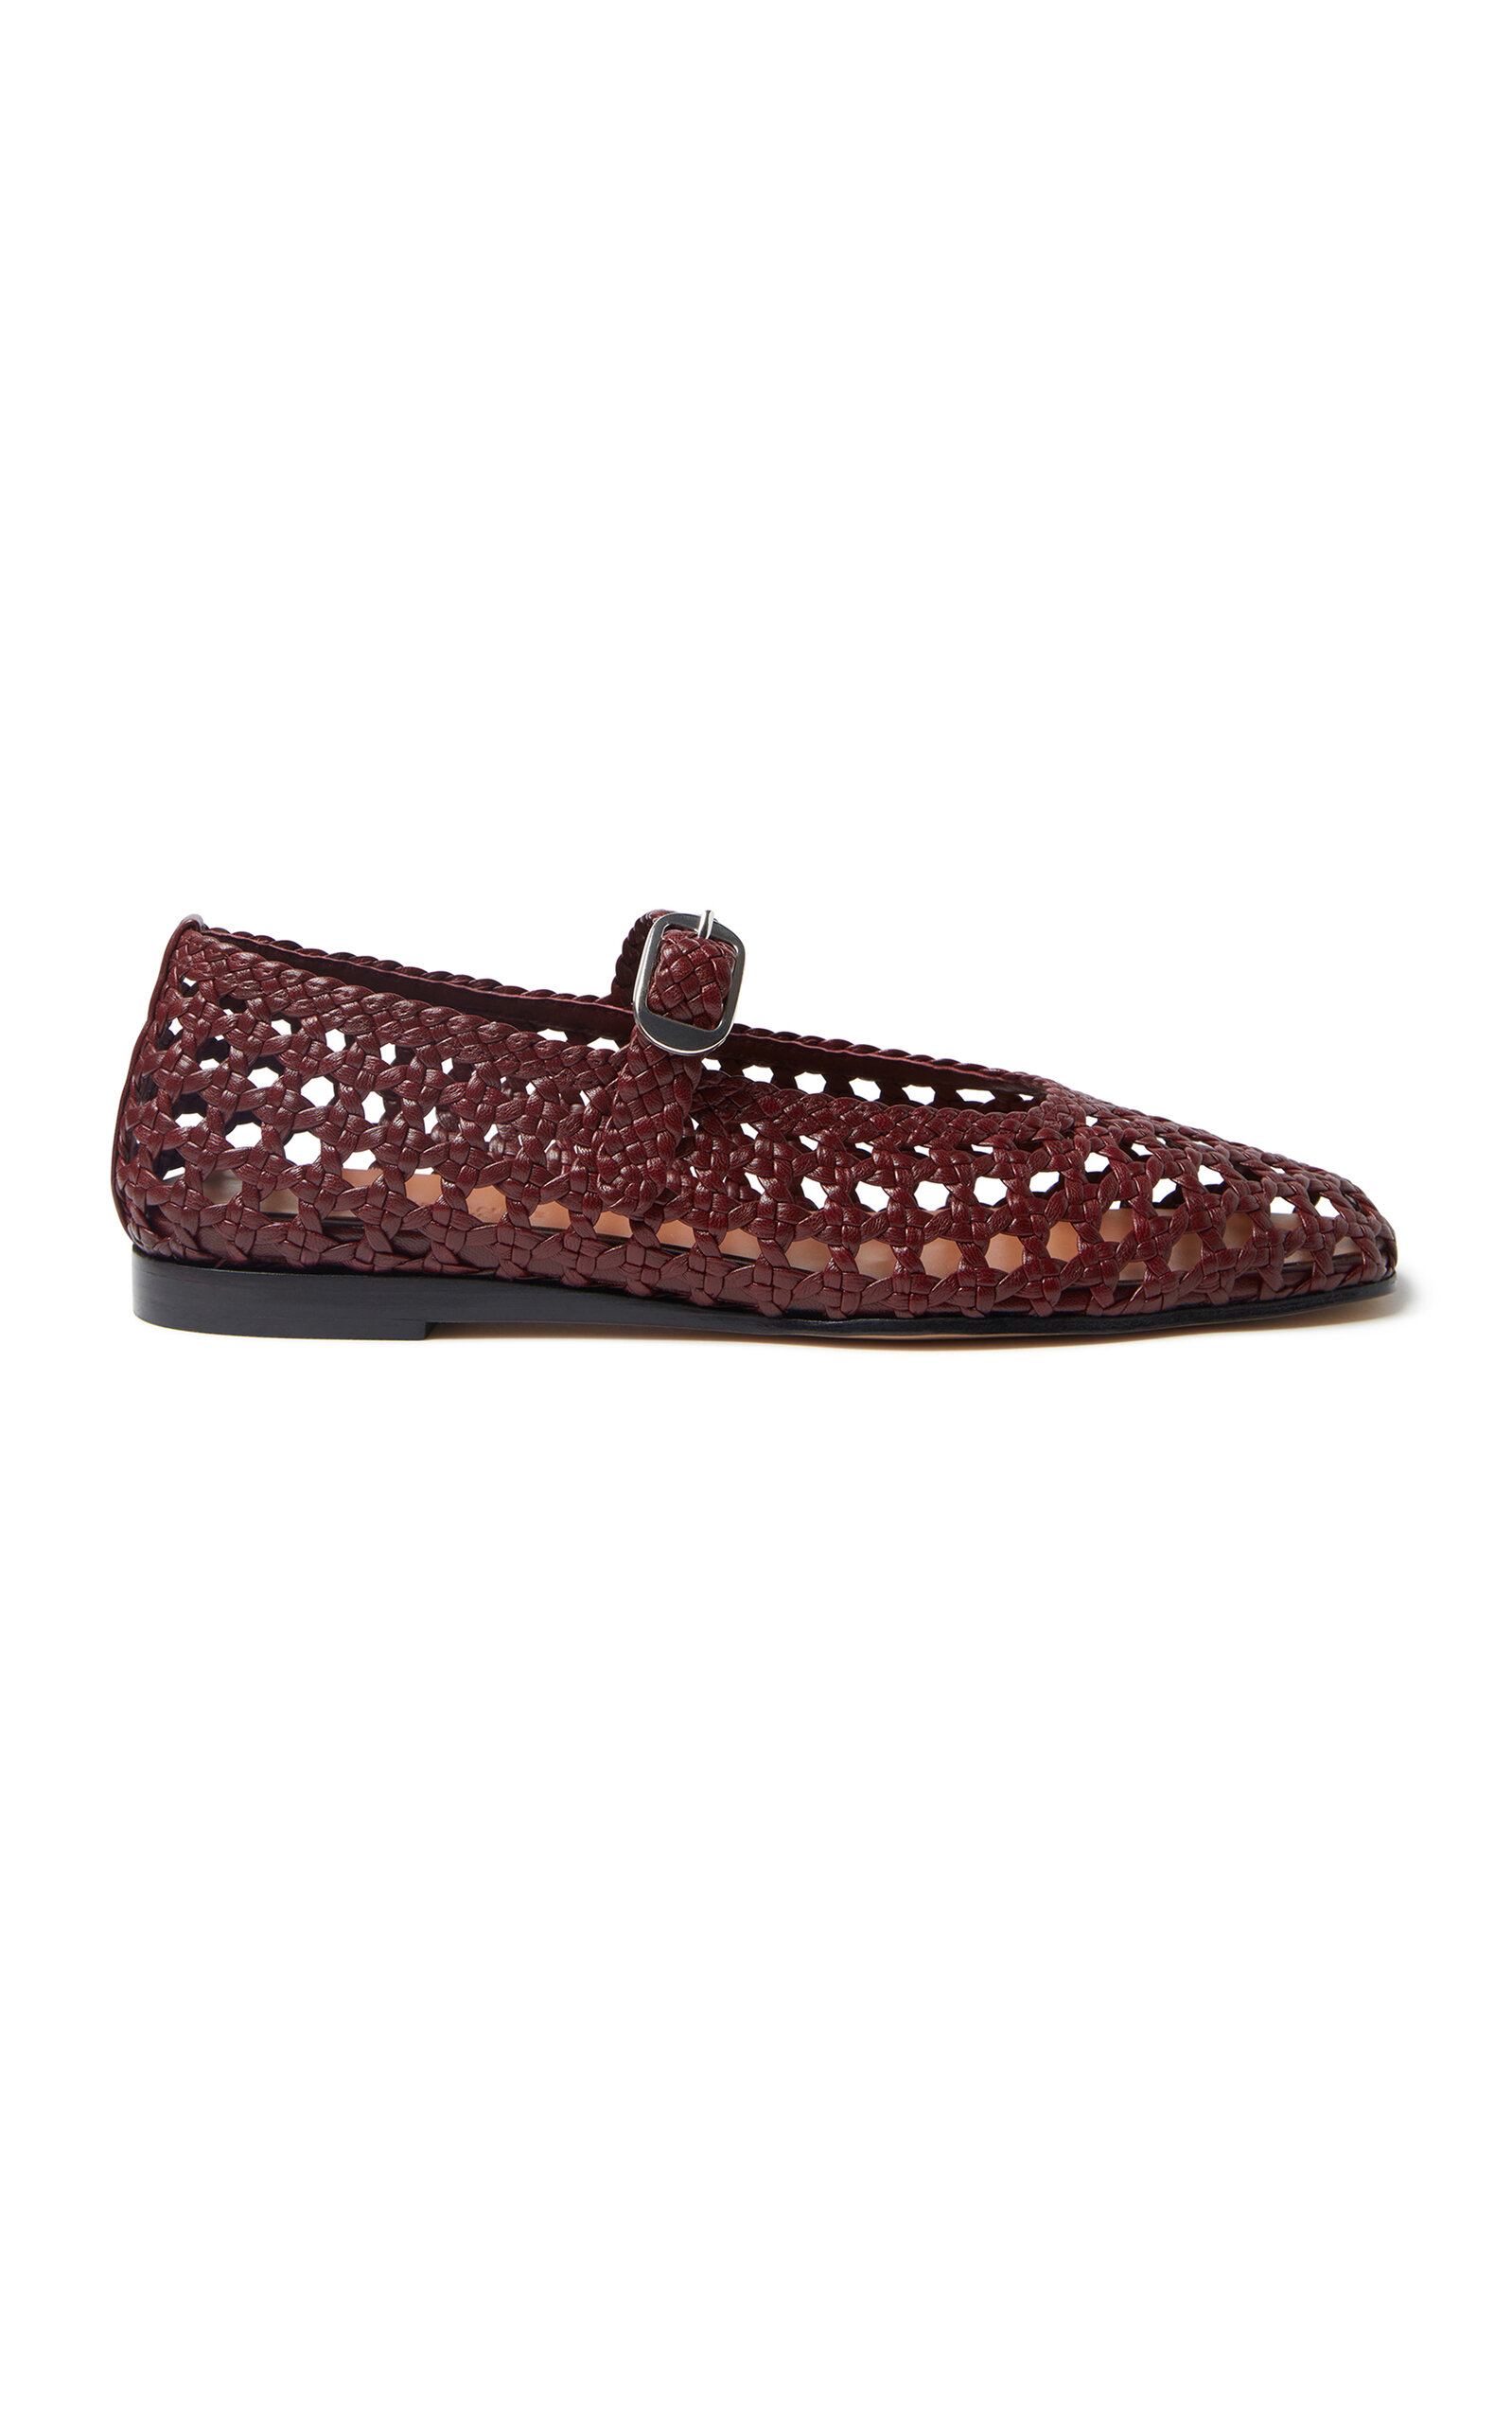 Woven Leather Mary Jane Flats